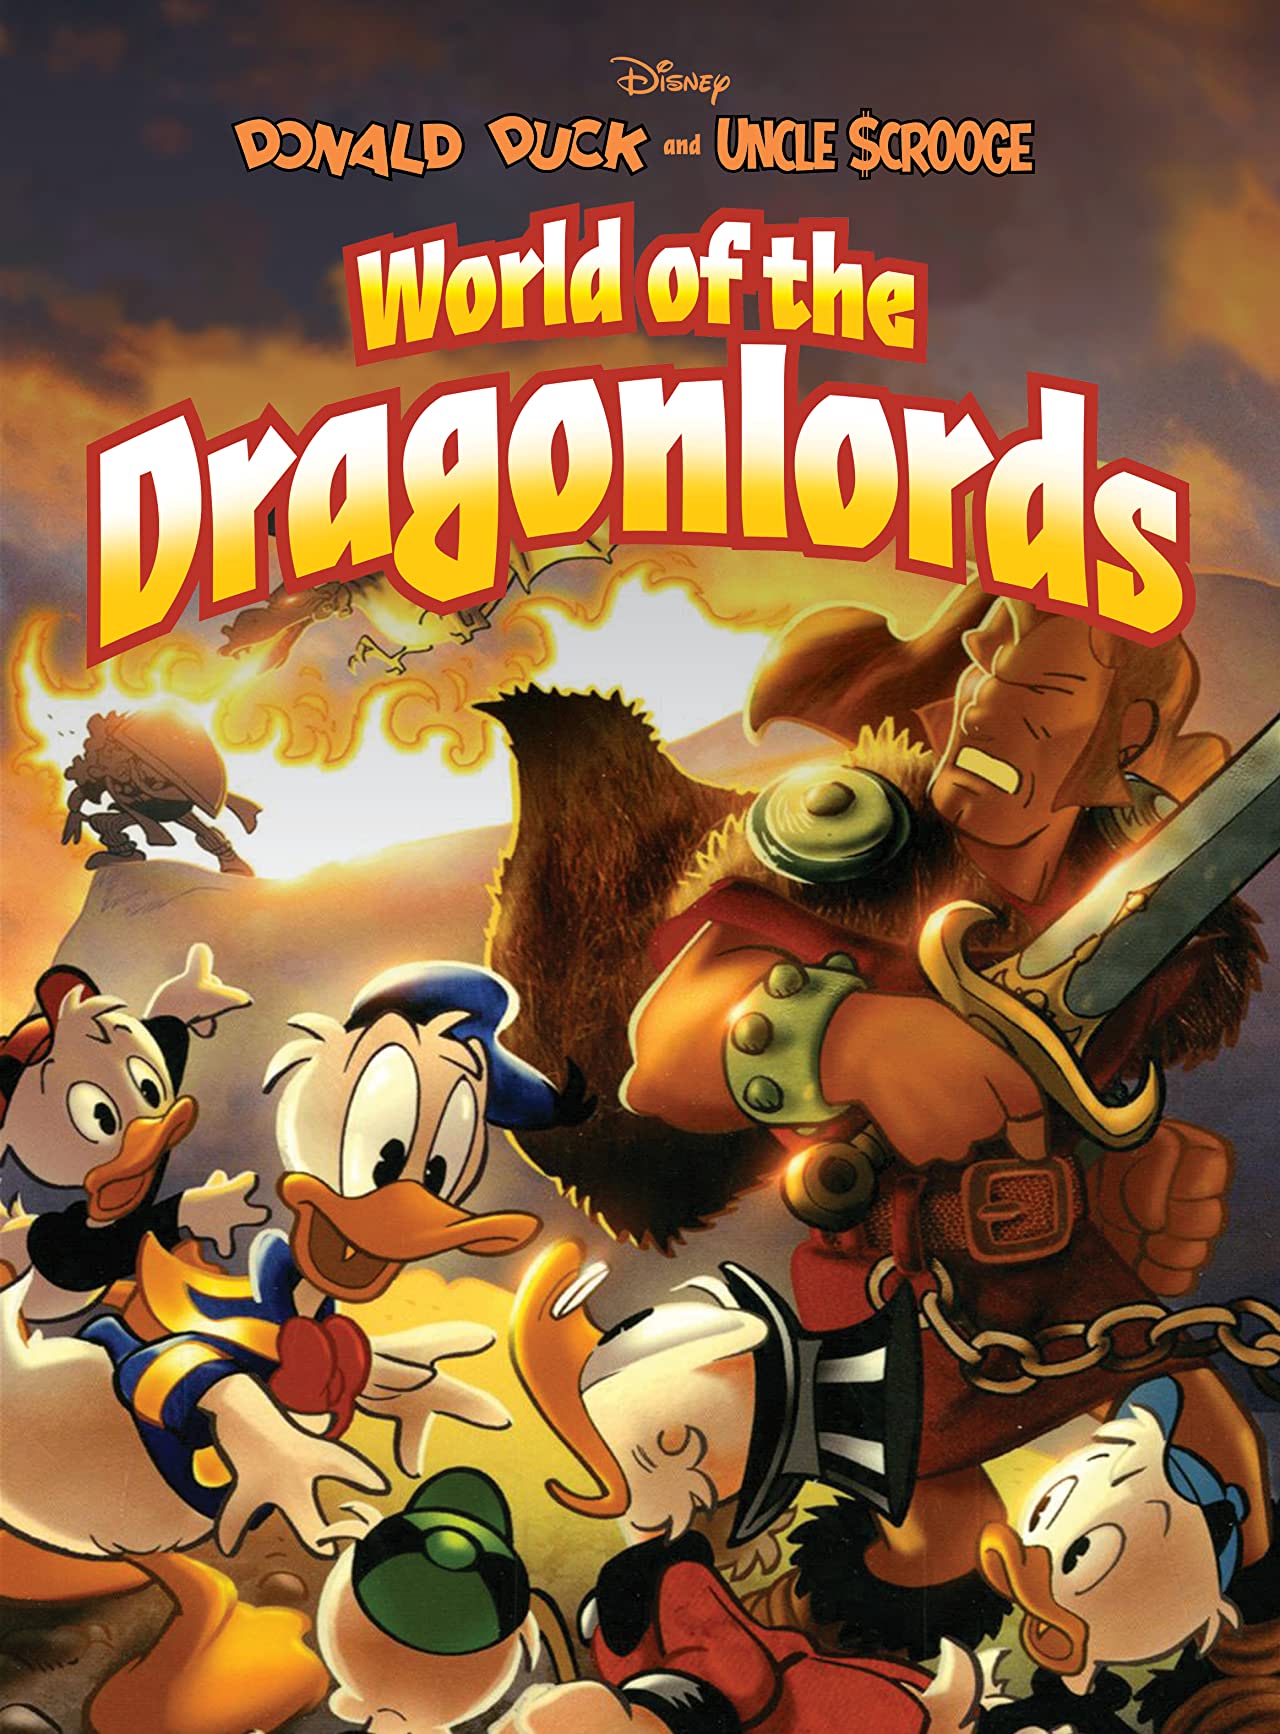 Donald Duck and Uncle Scrooge: World of the Dragonlords | Review